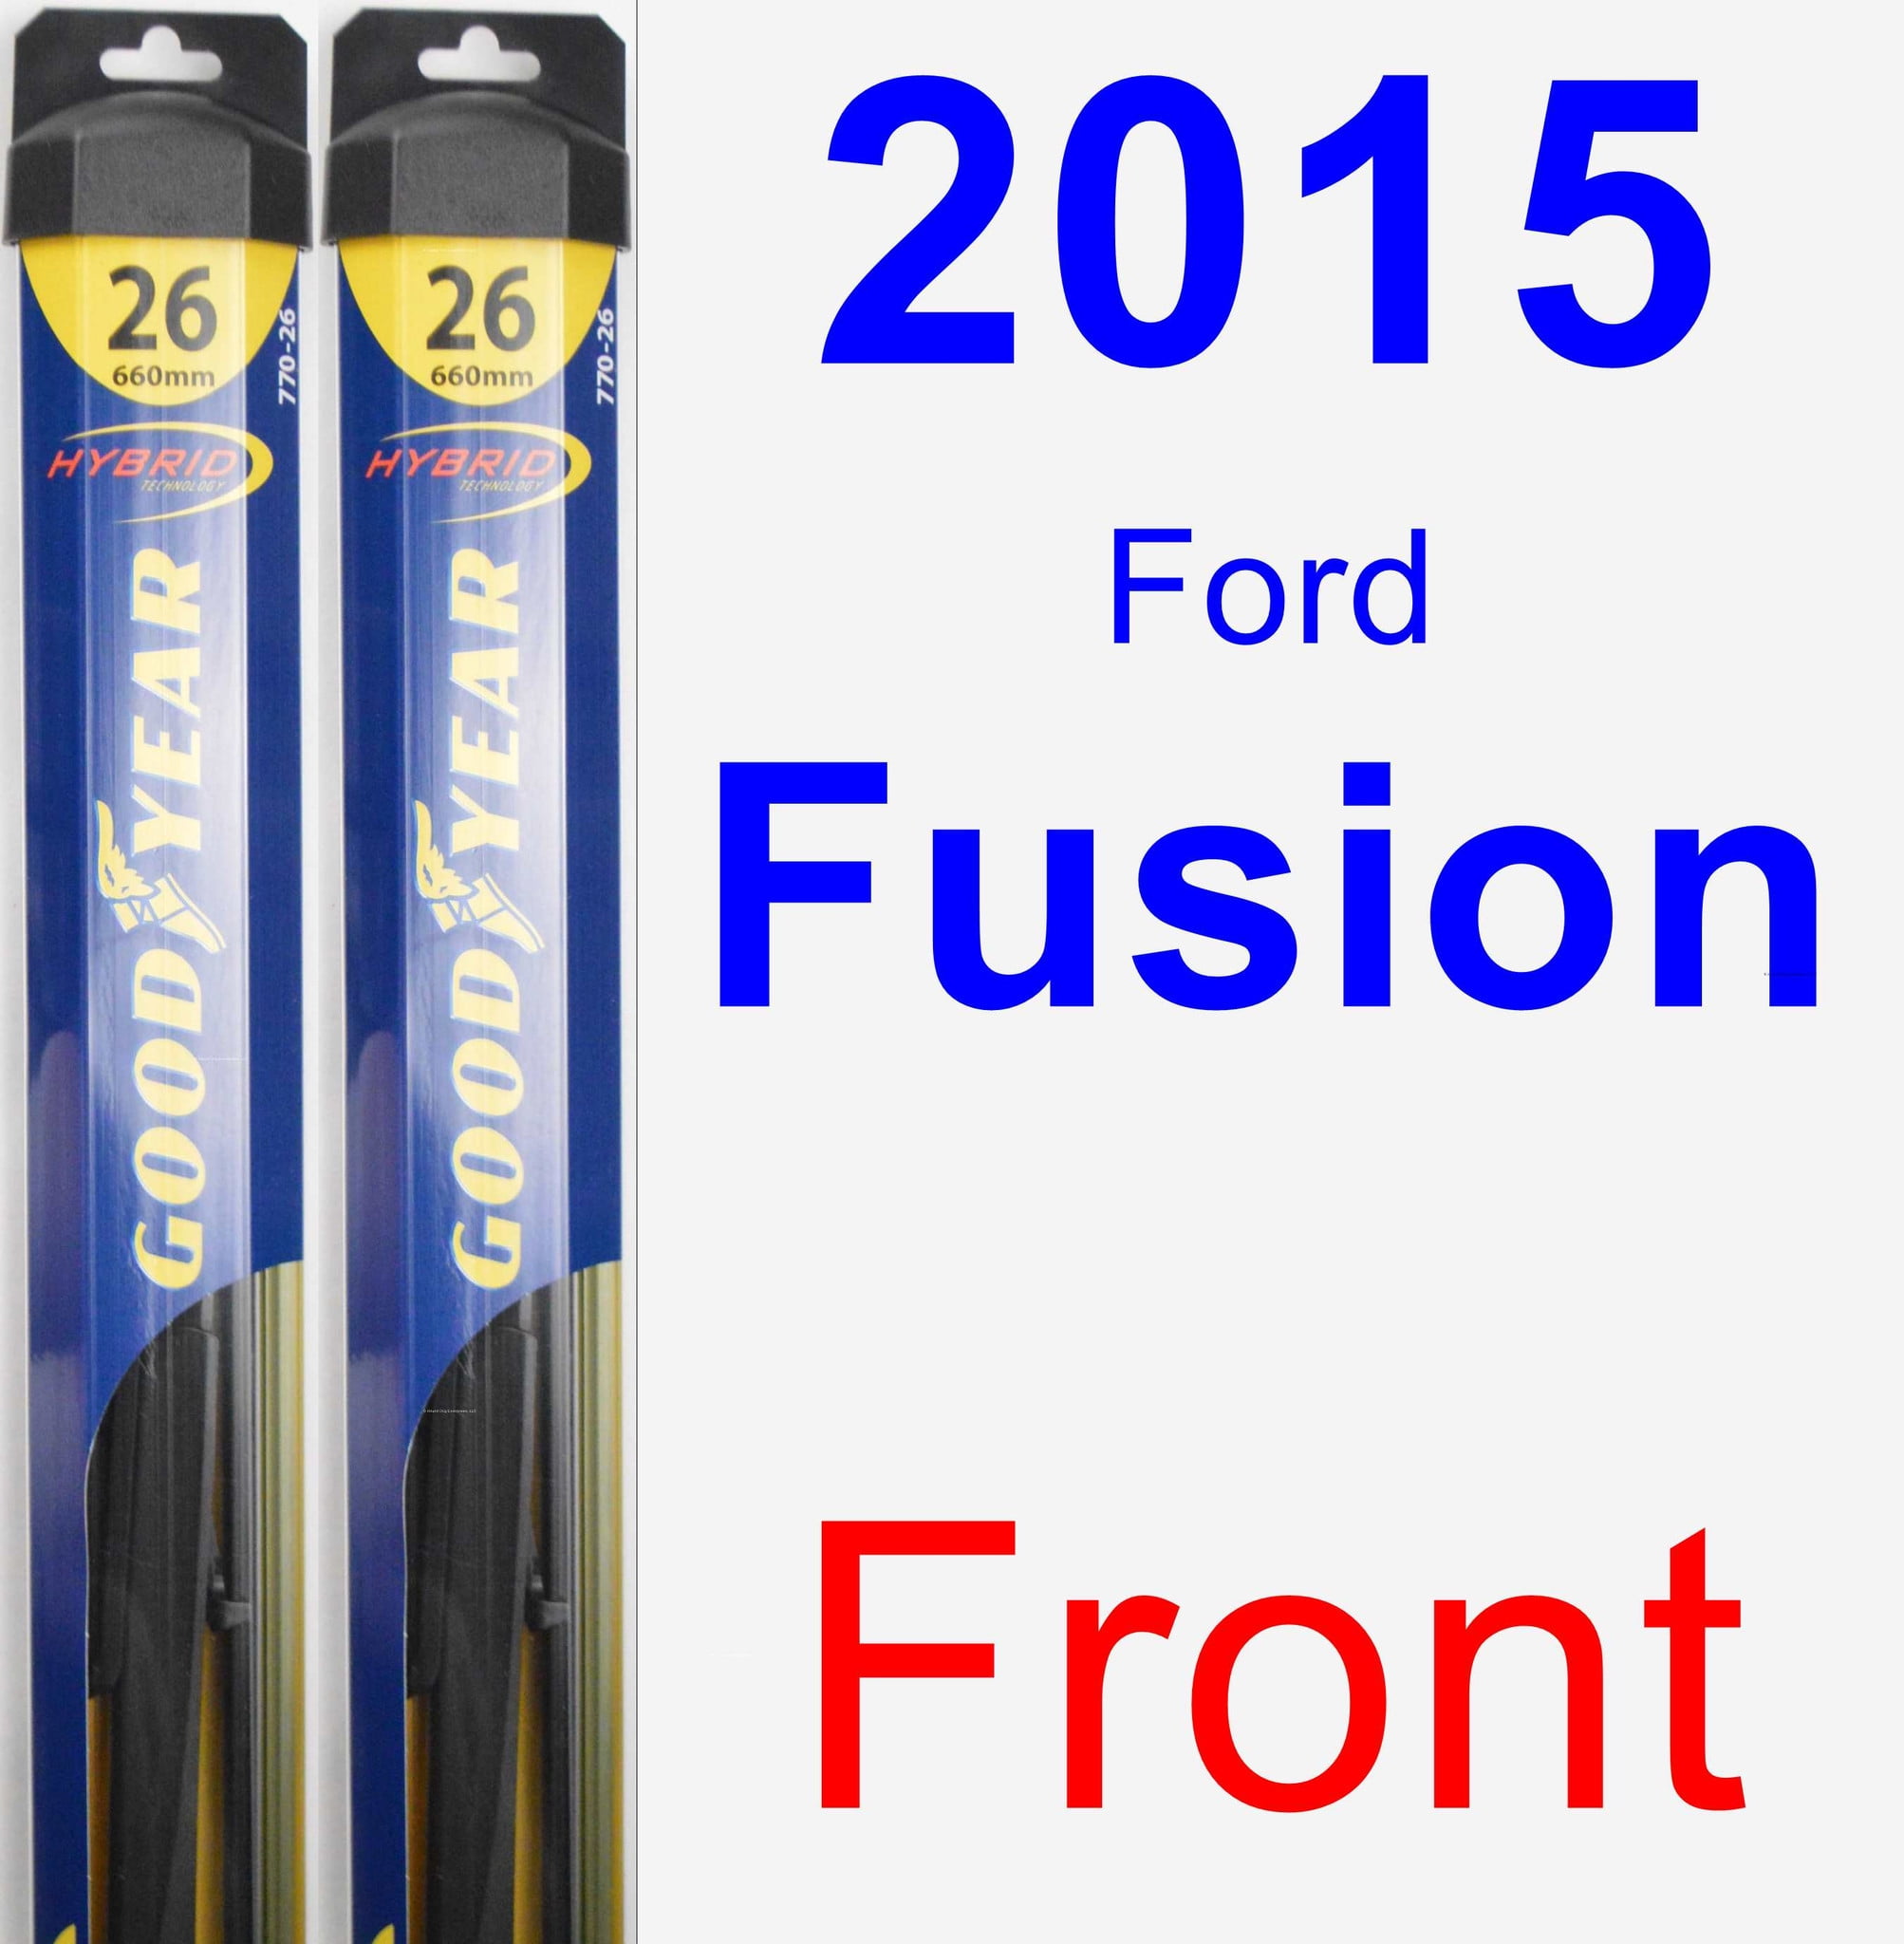 2015 ford fusion wiper blade size